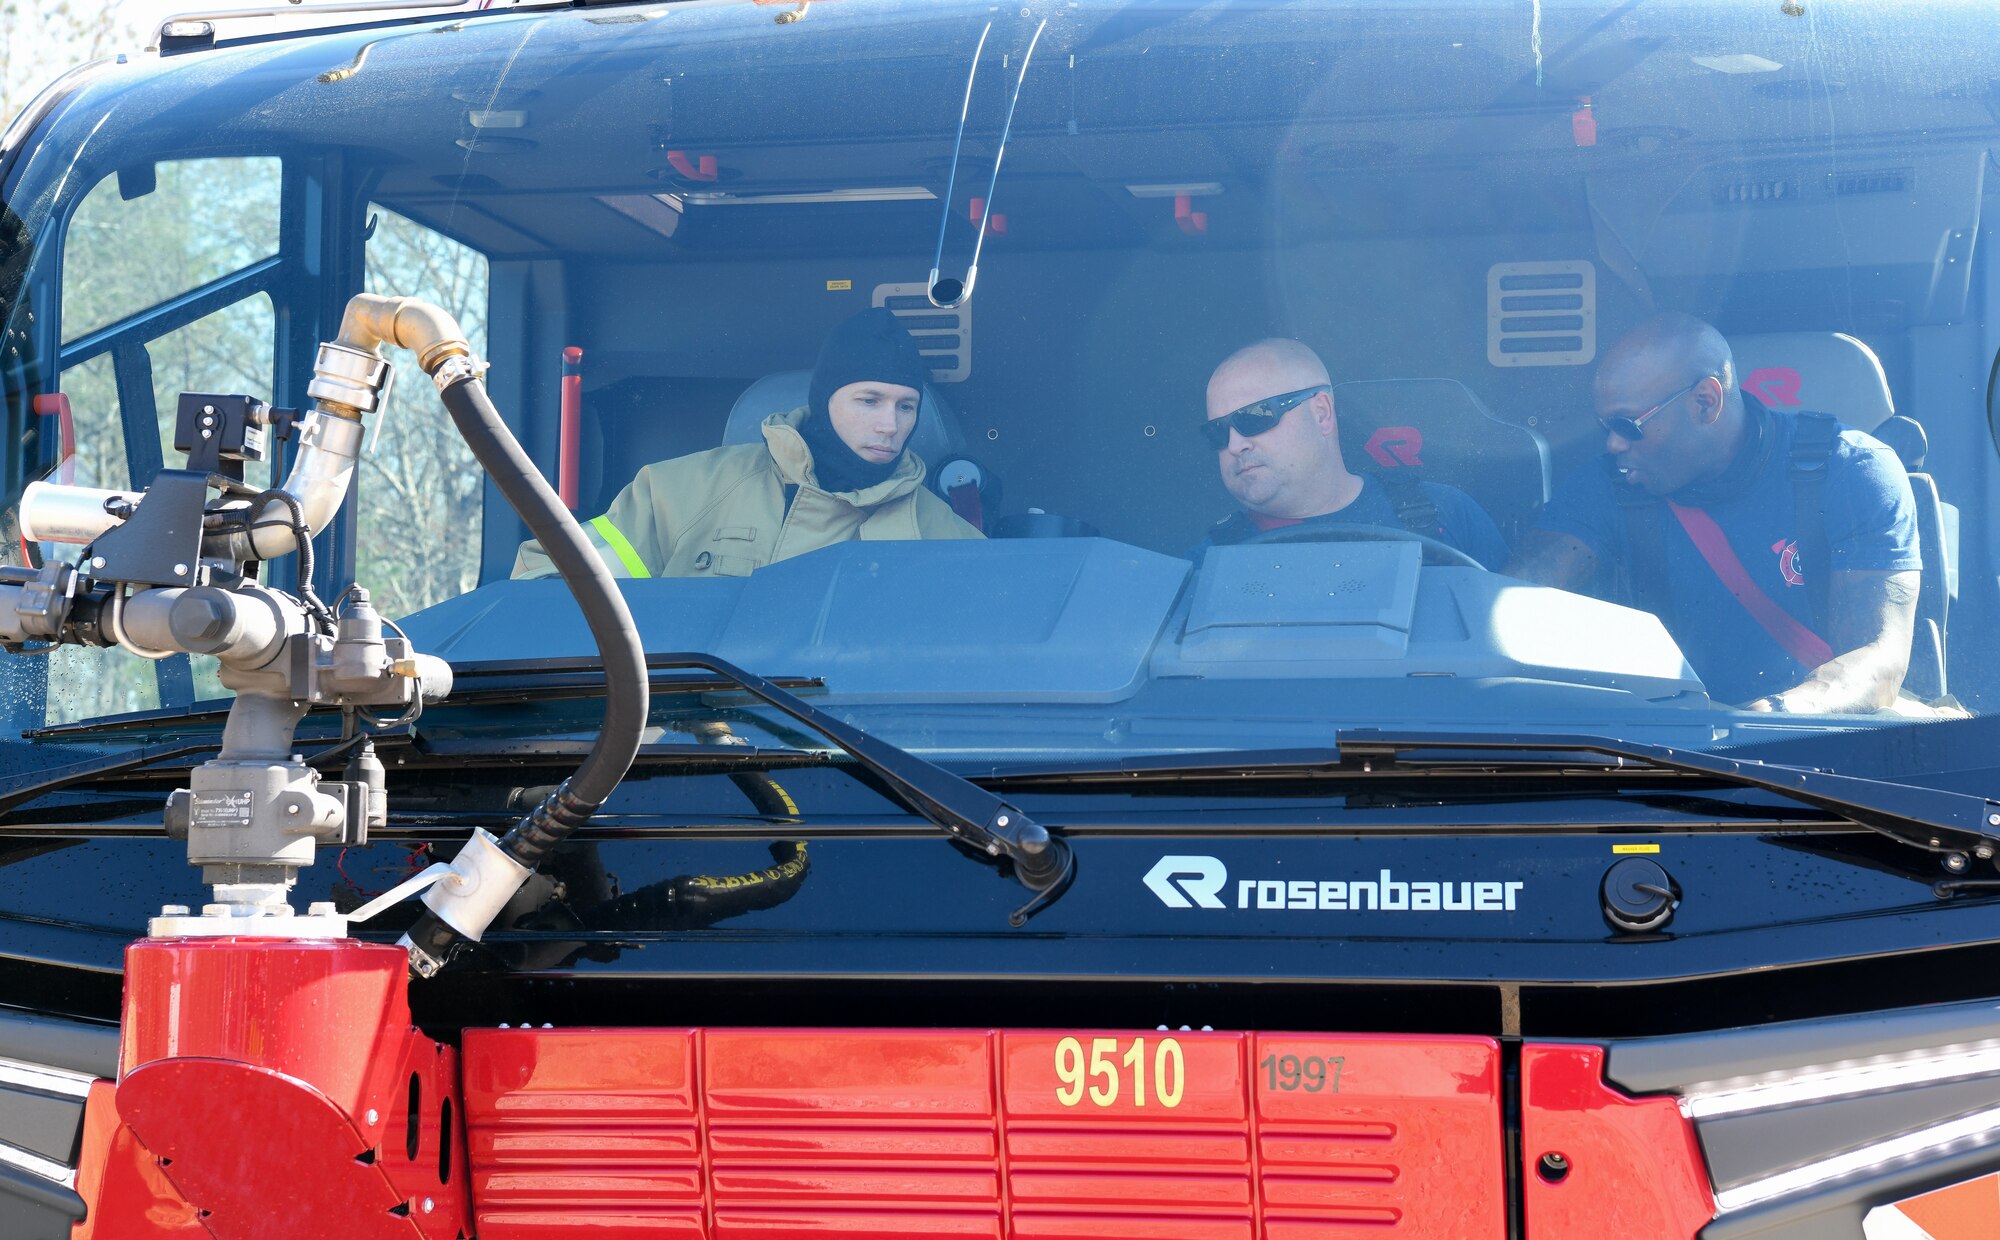 Jason Armstrong and Col. Chris Lance seen through windshield of firefighting vehicle